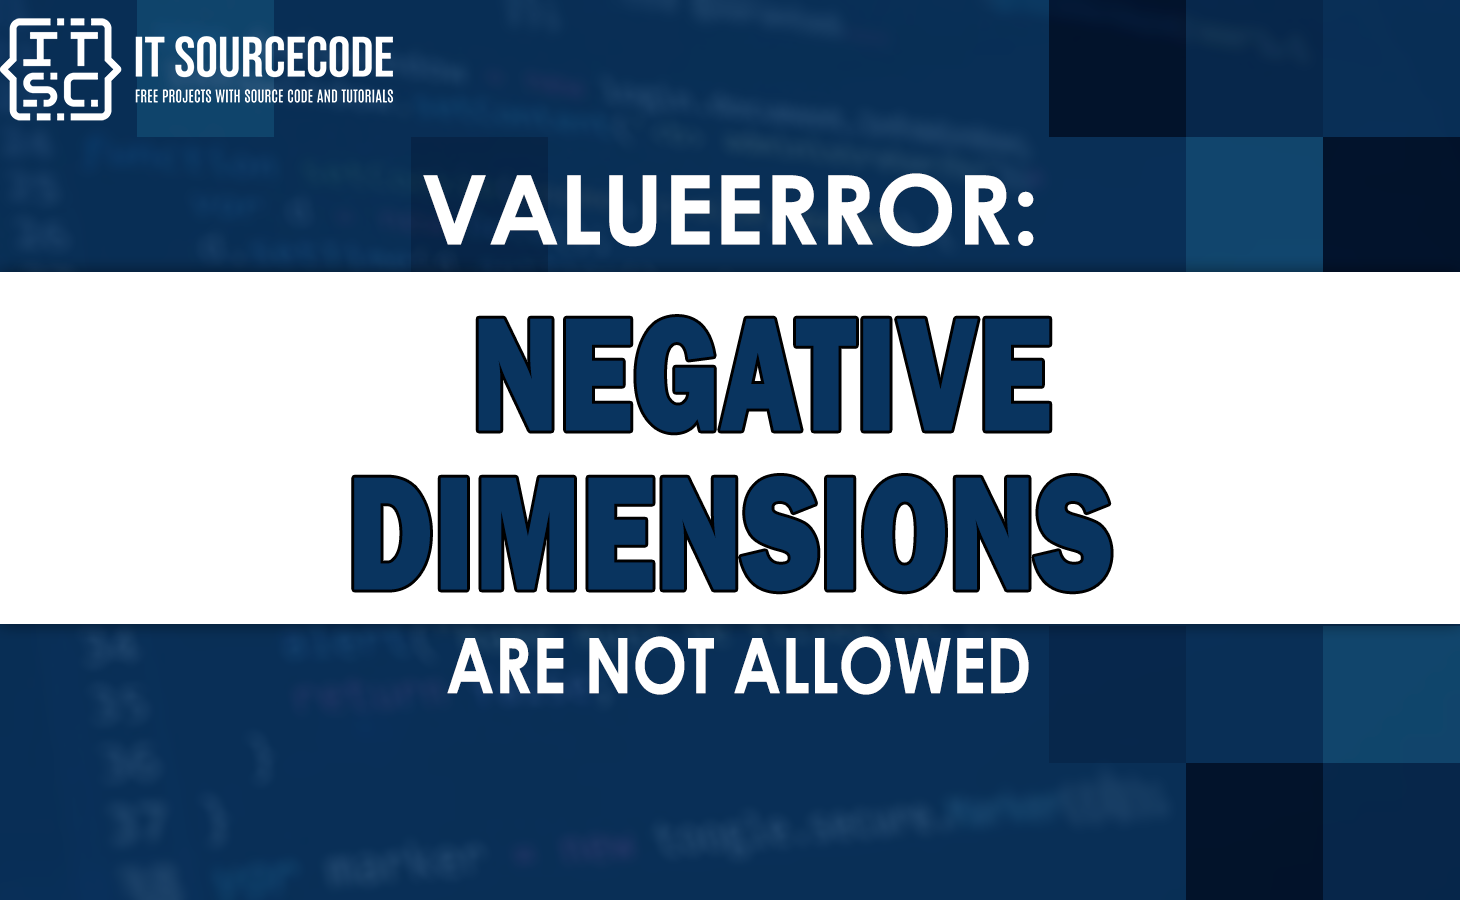 valueerror negative dimensions are not allowed